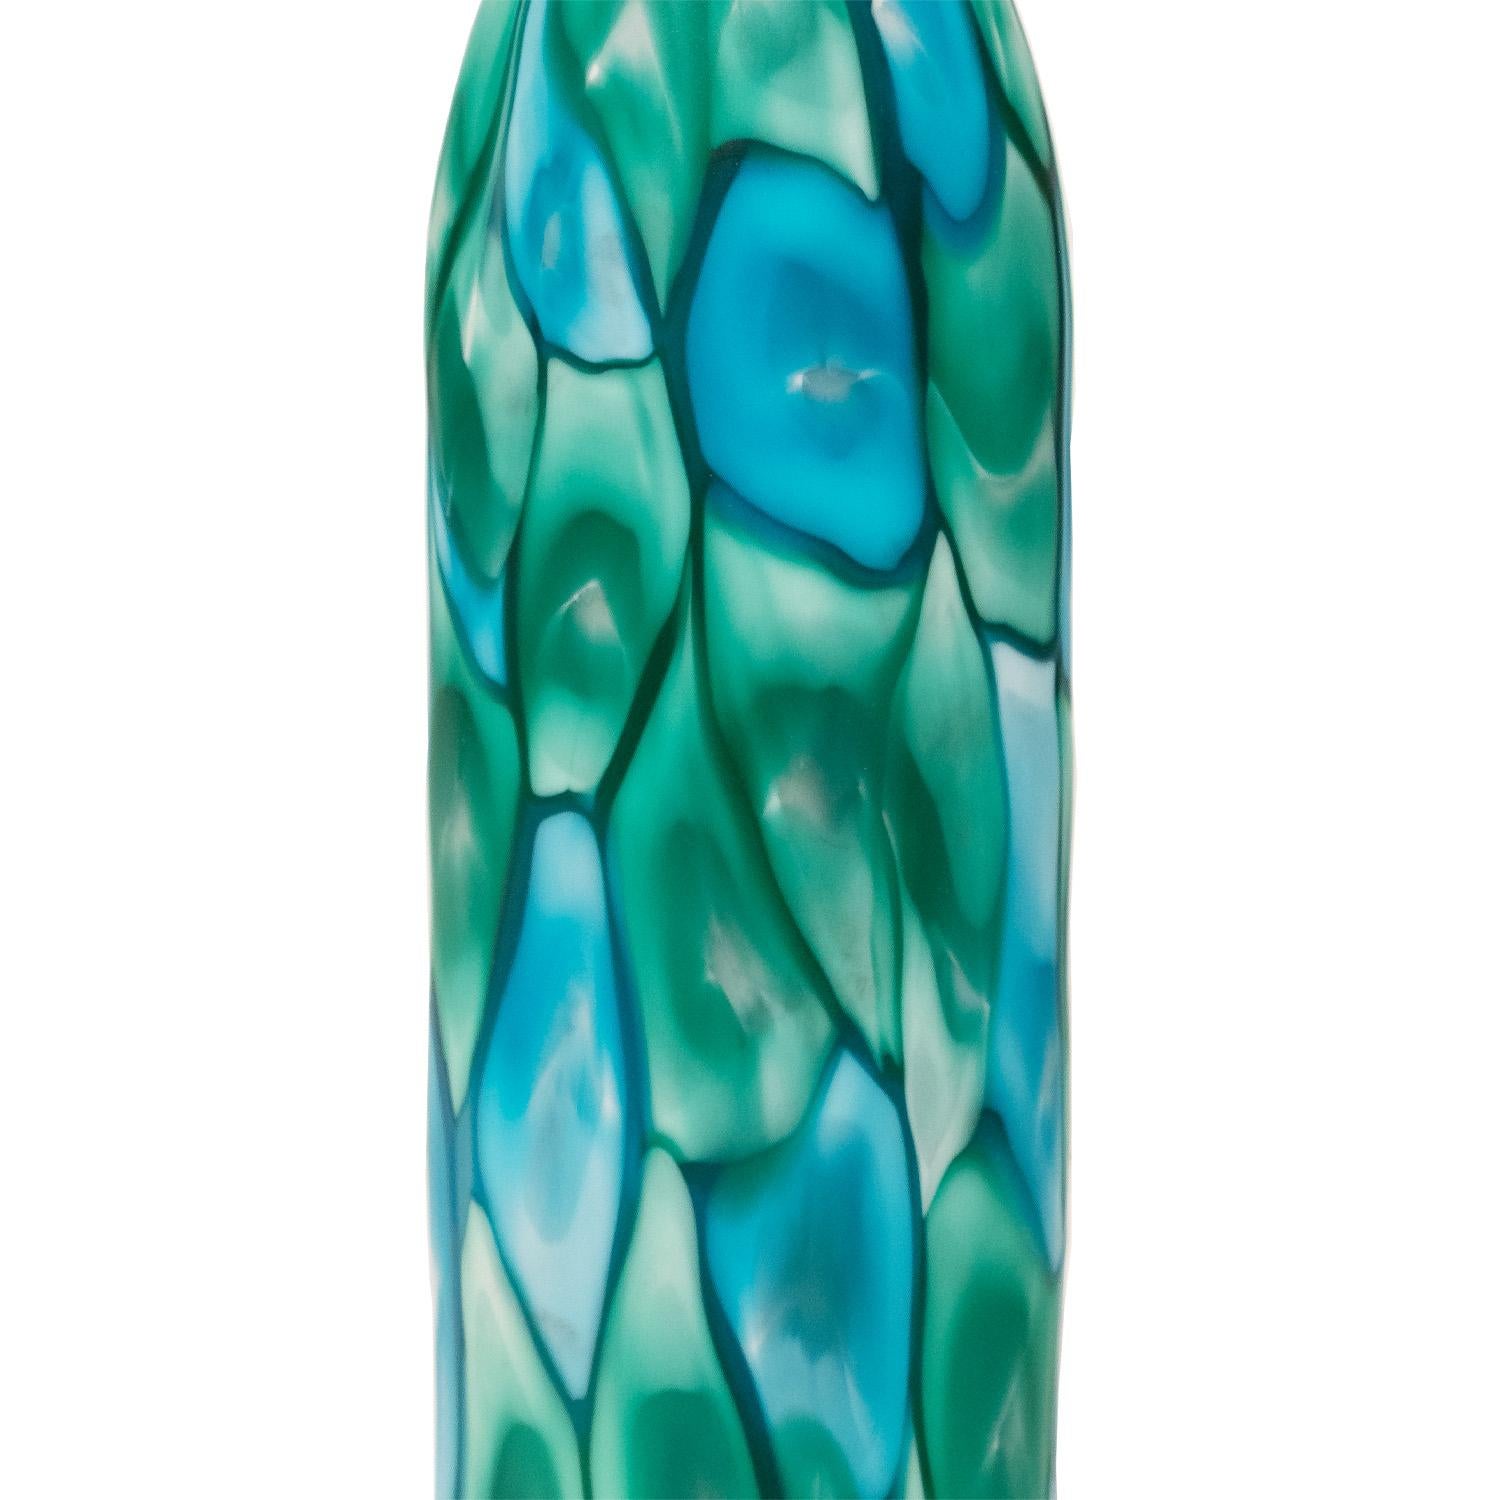 Italian Fratelli Toso Art Glass Table Lamp with Green and Blue Murrhines, 1959 For Sale